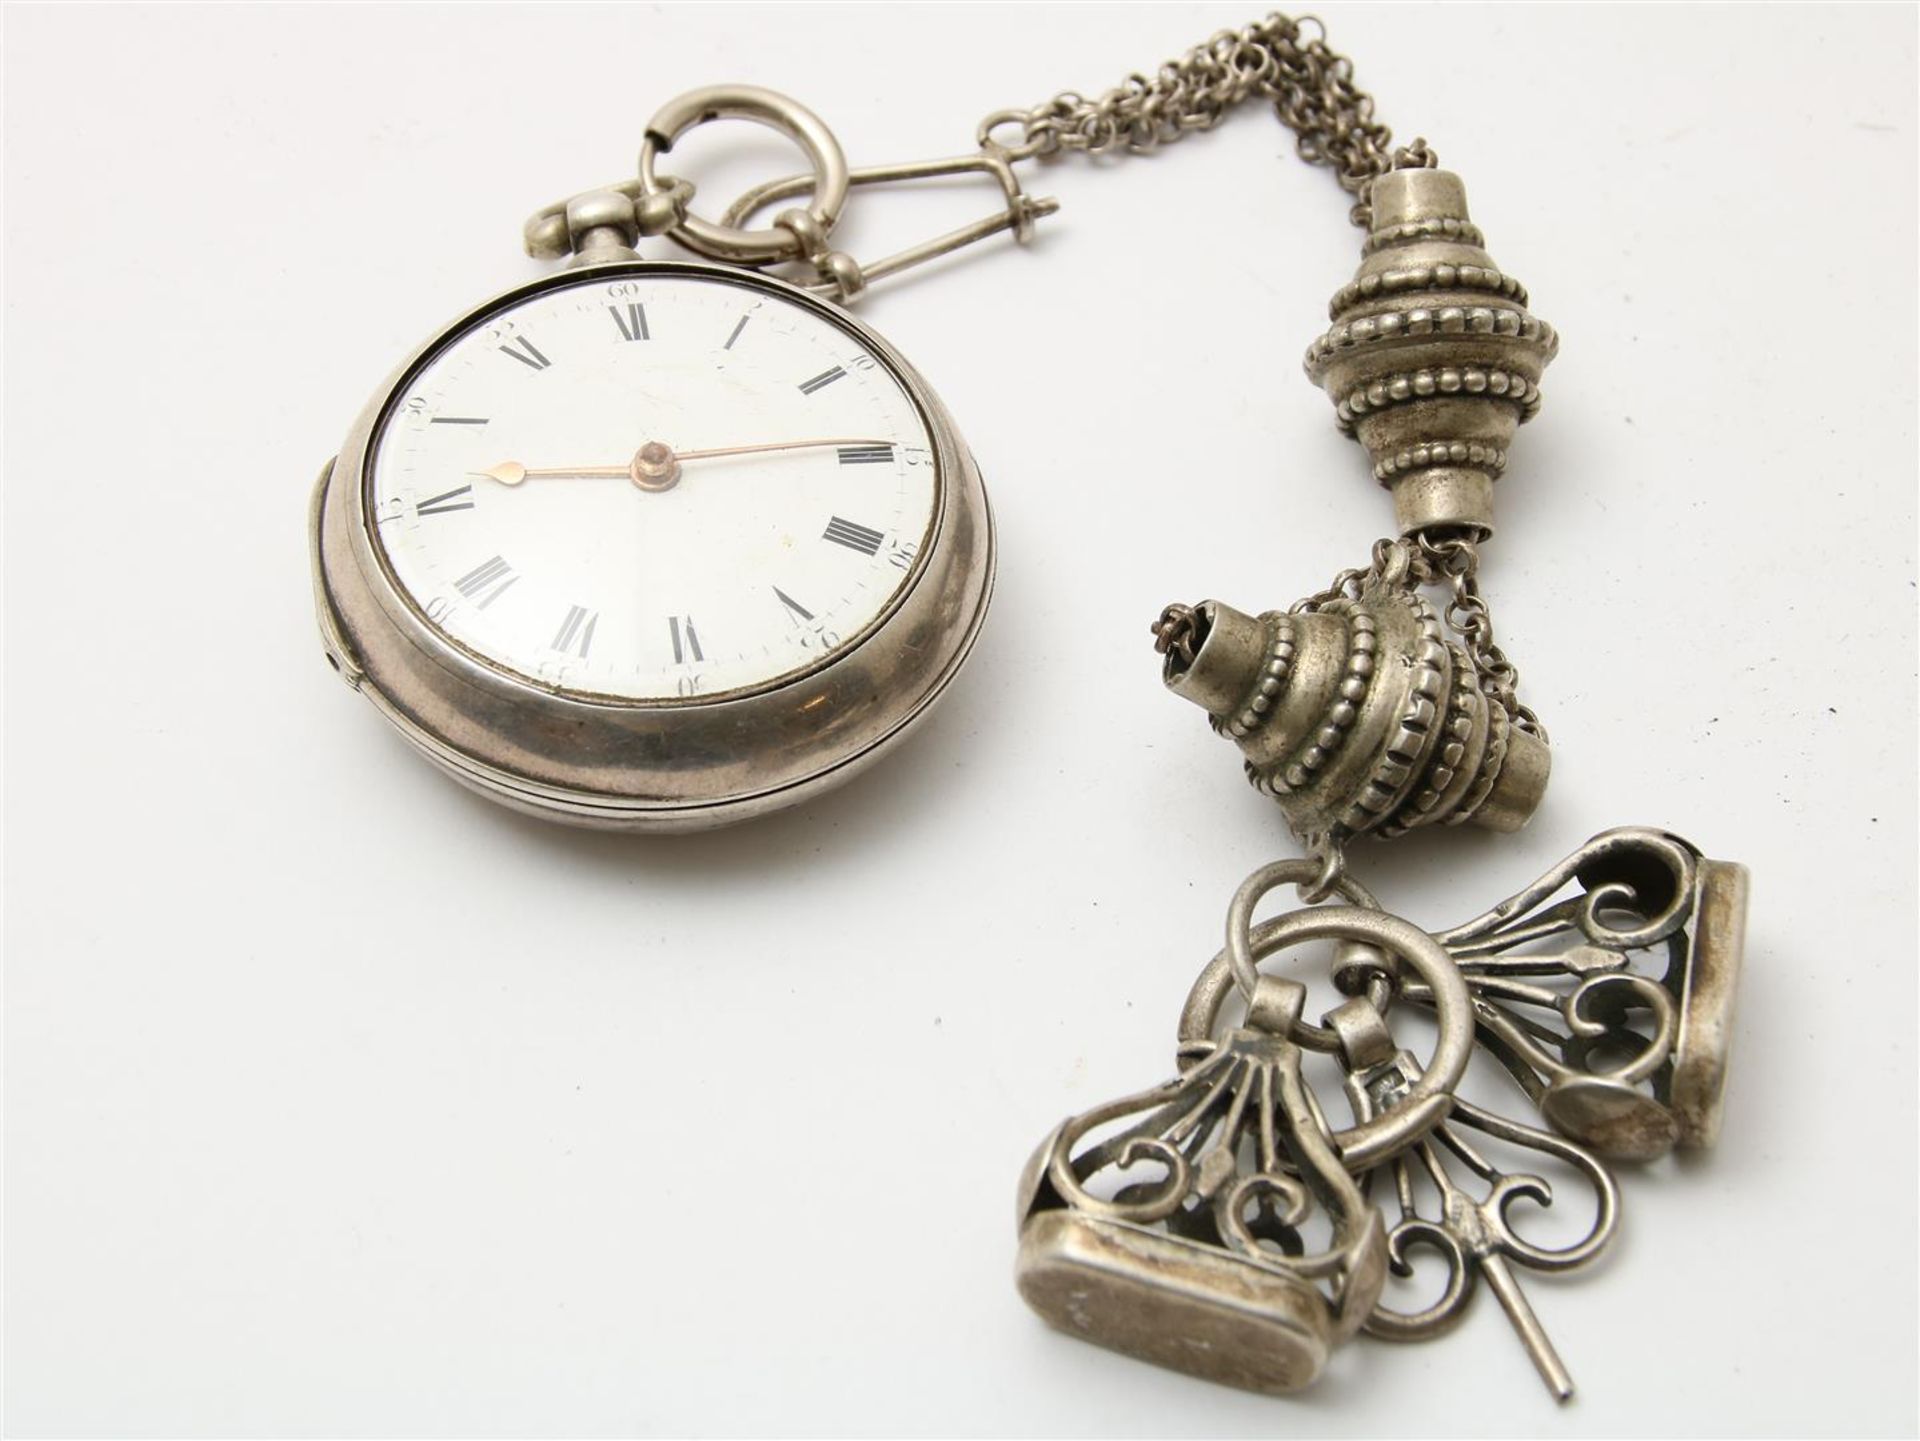 Silver pocket watch with silver chatelaine, probably England.